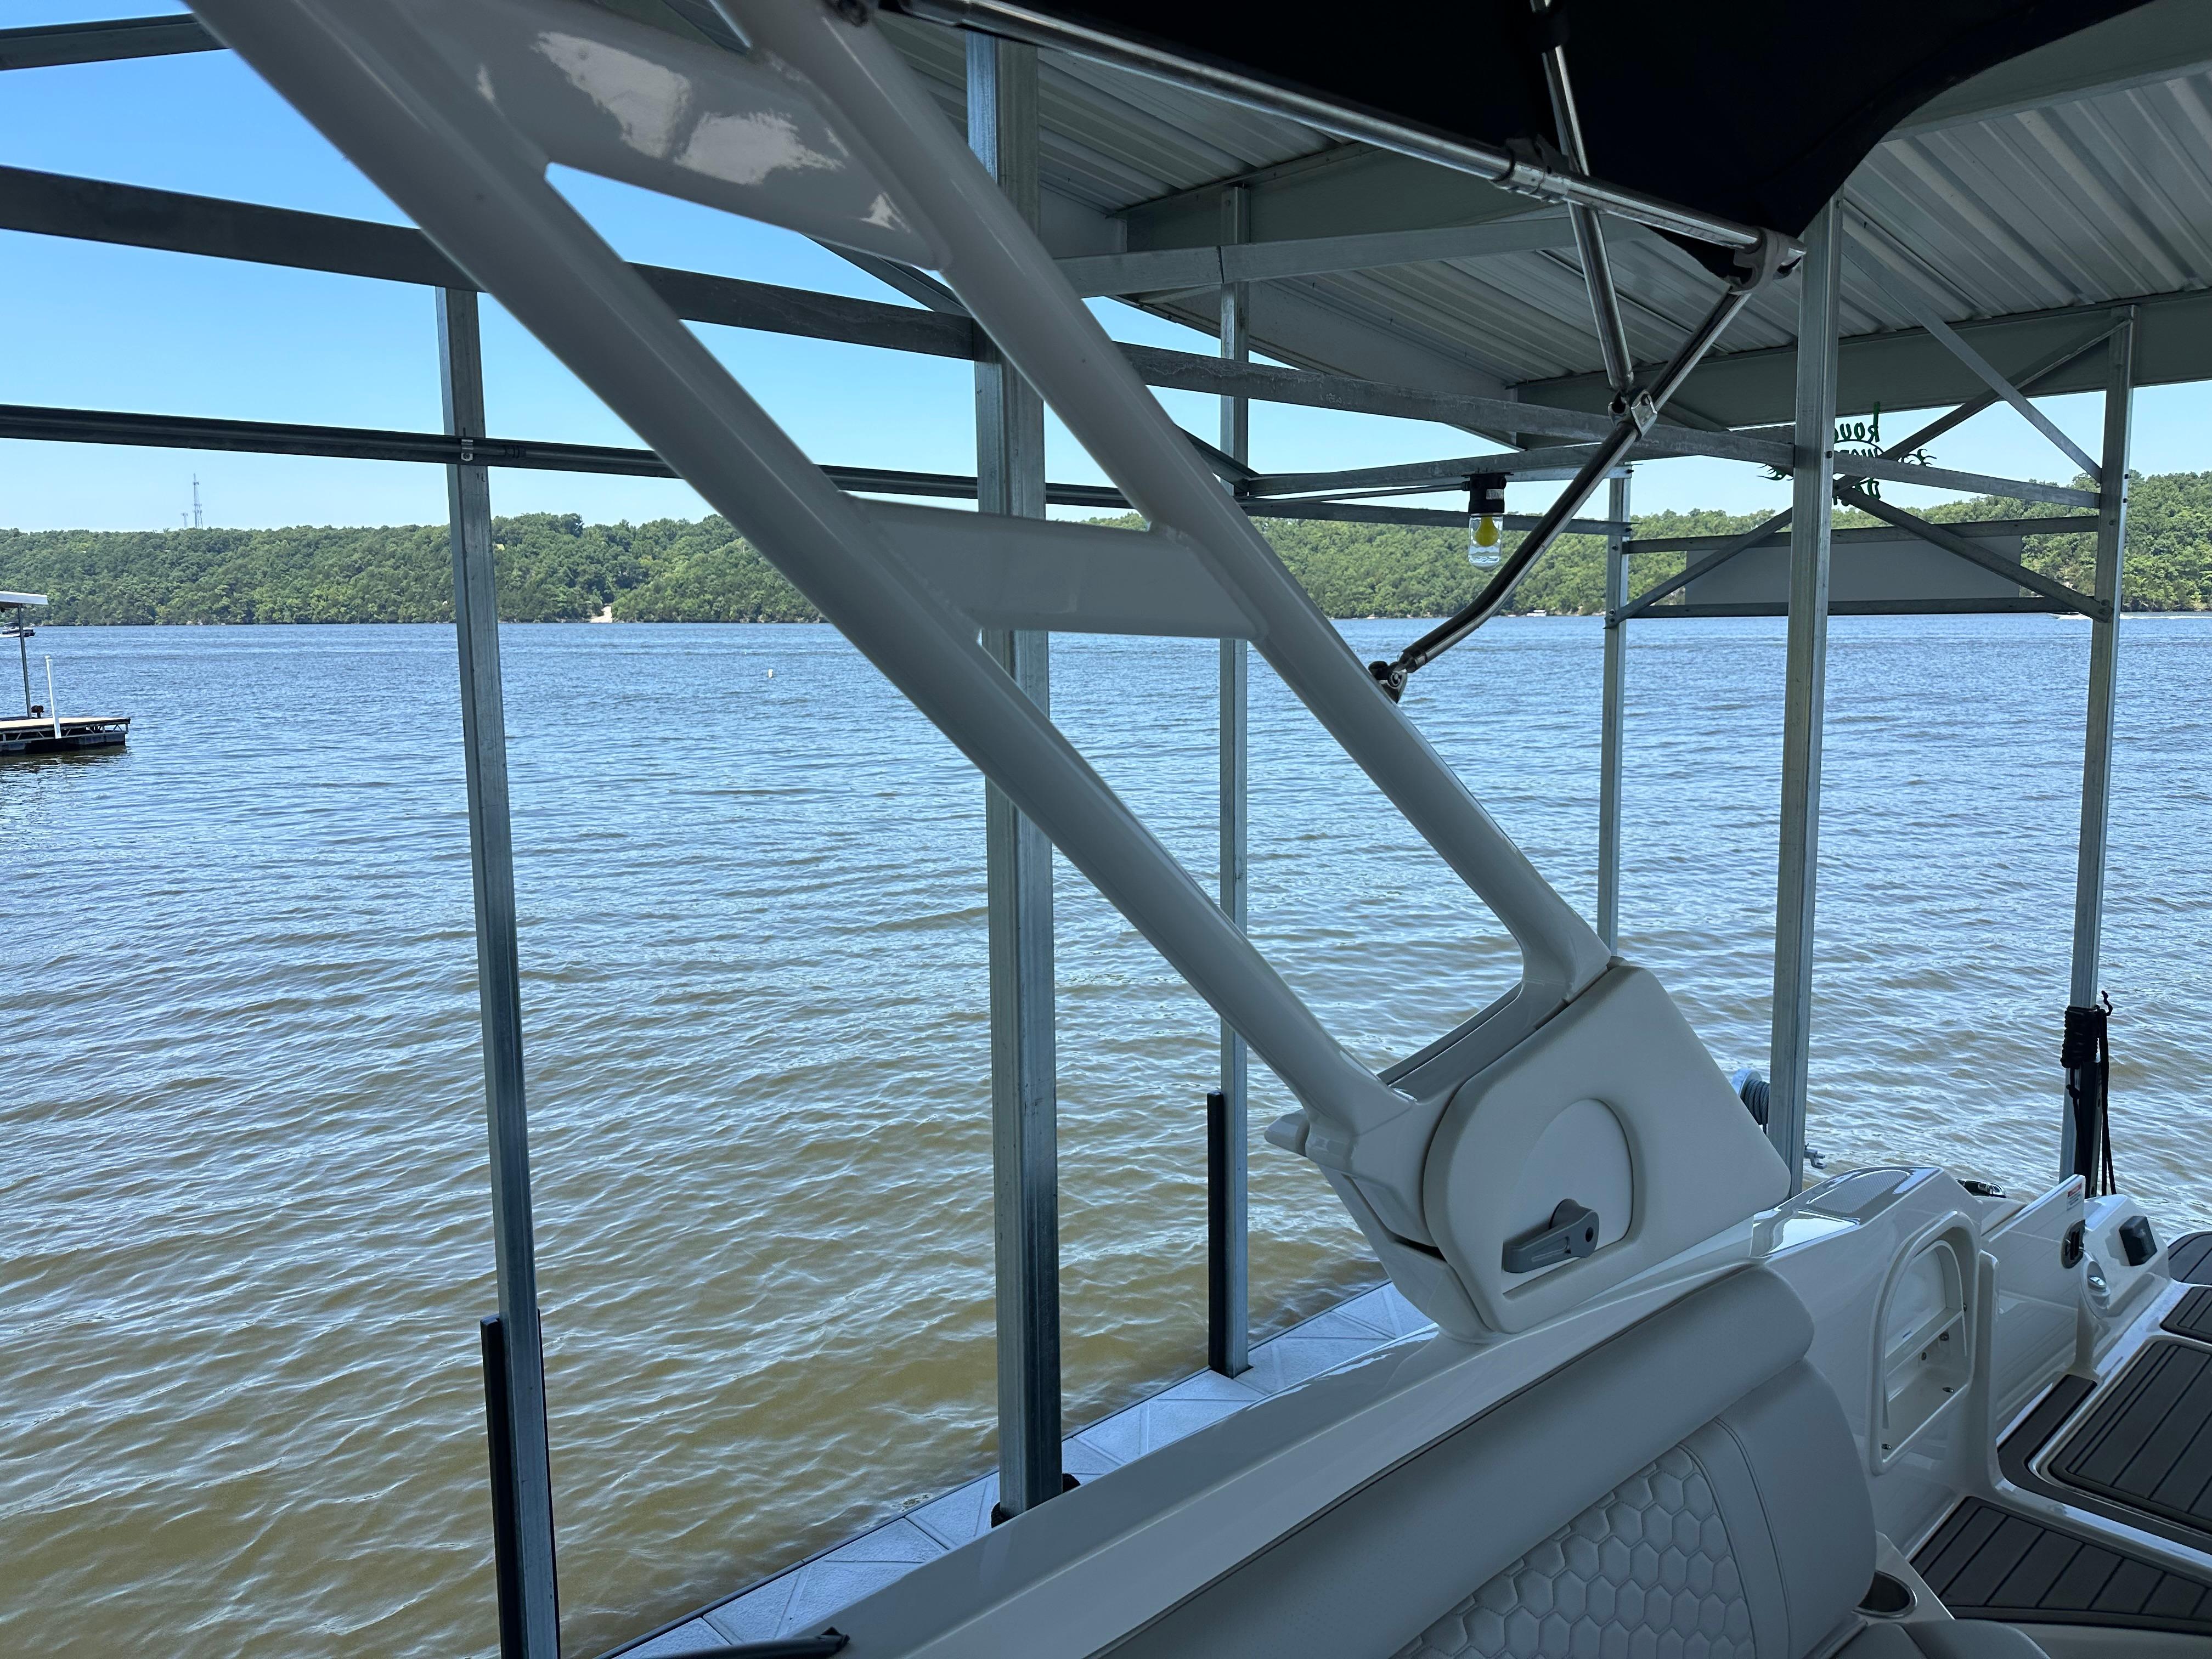 2022 Sea Ray SDX 270 Outboard Deck for sale - YachtWorld